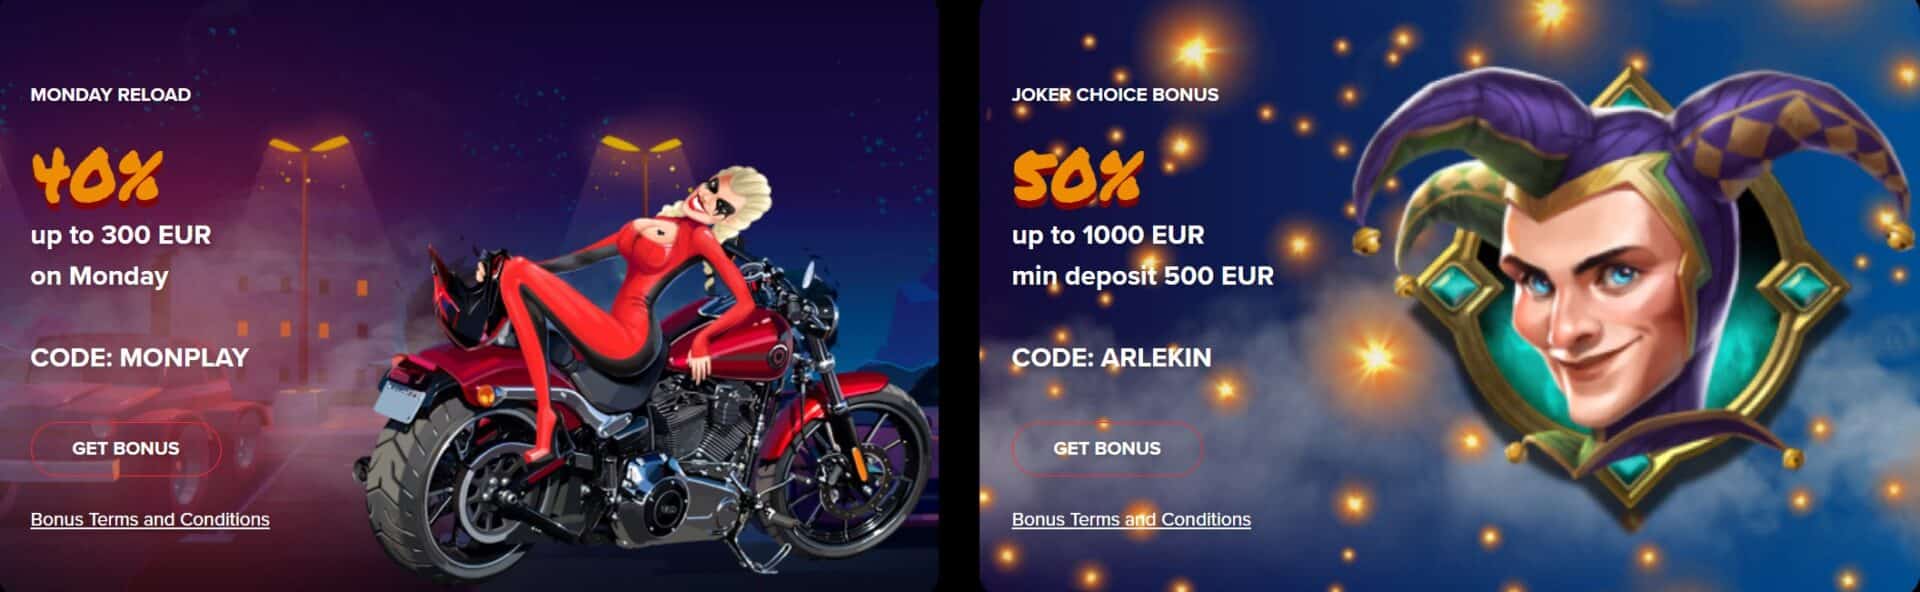 Additional bonuses are also being offered at Arlekin Casino